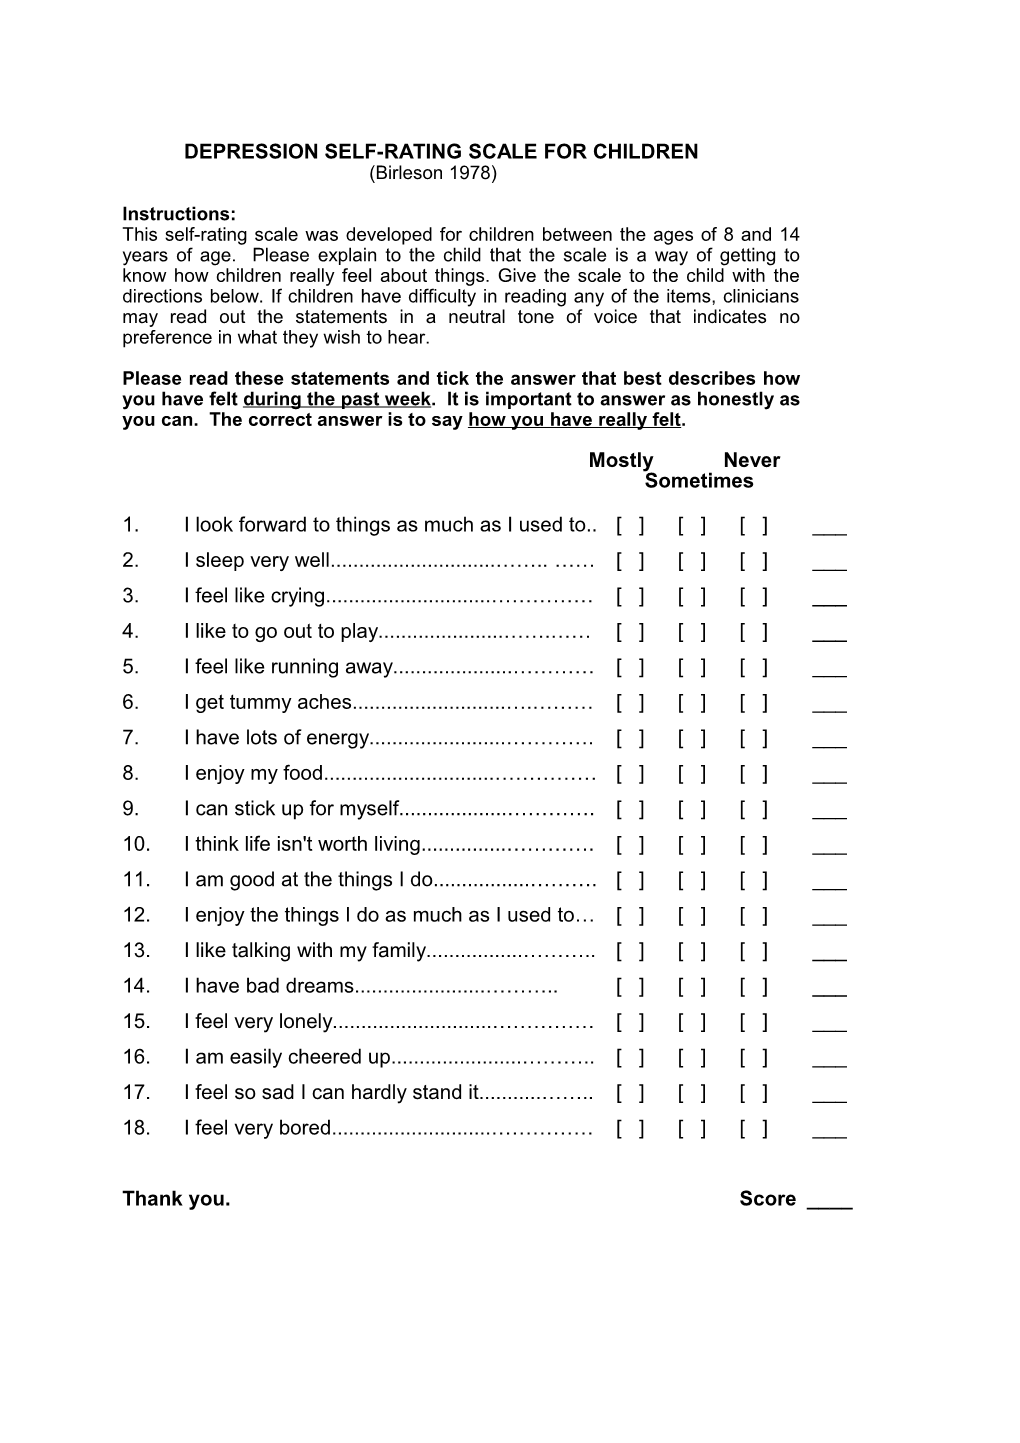 Depression Self-Rating Scale for Children